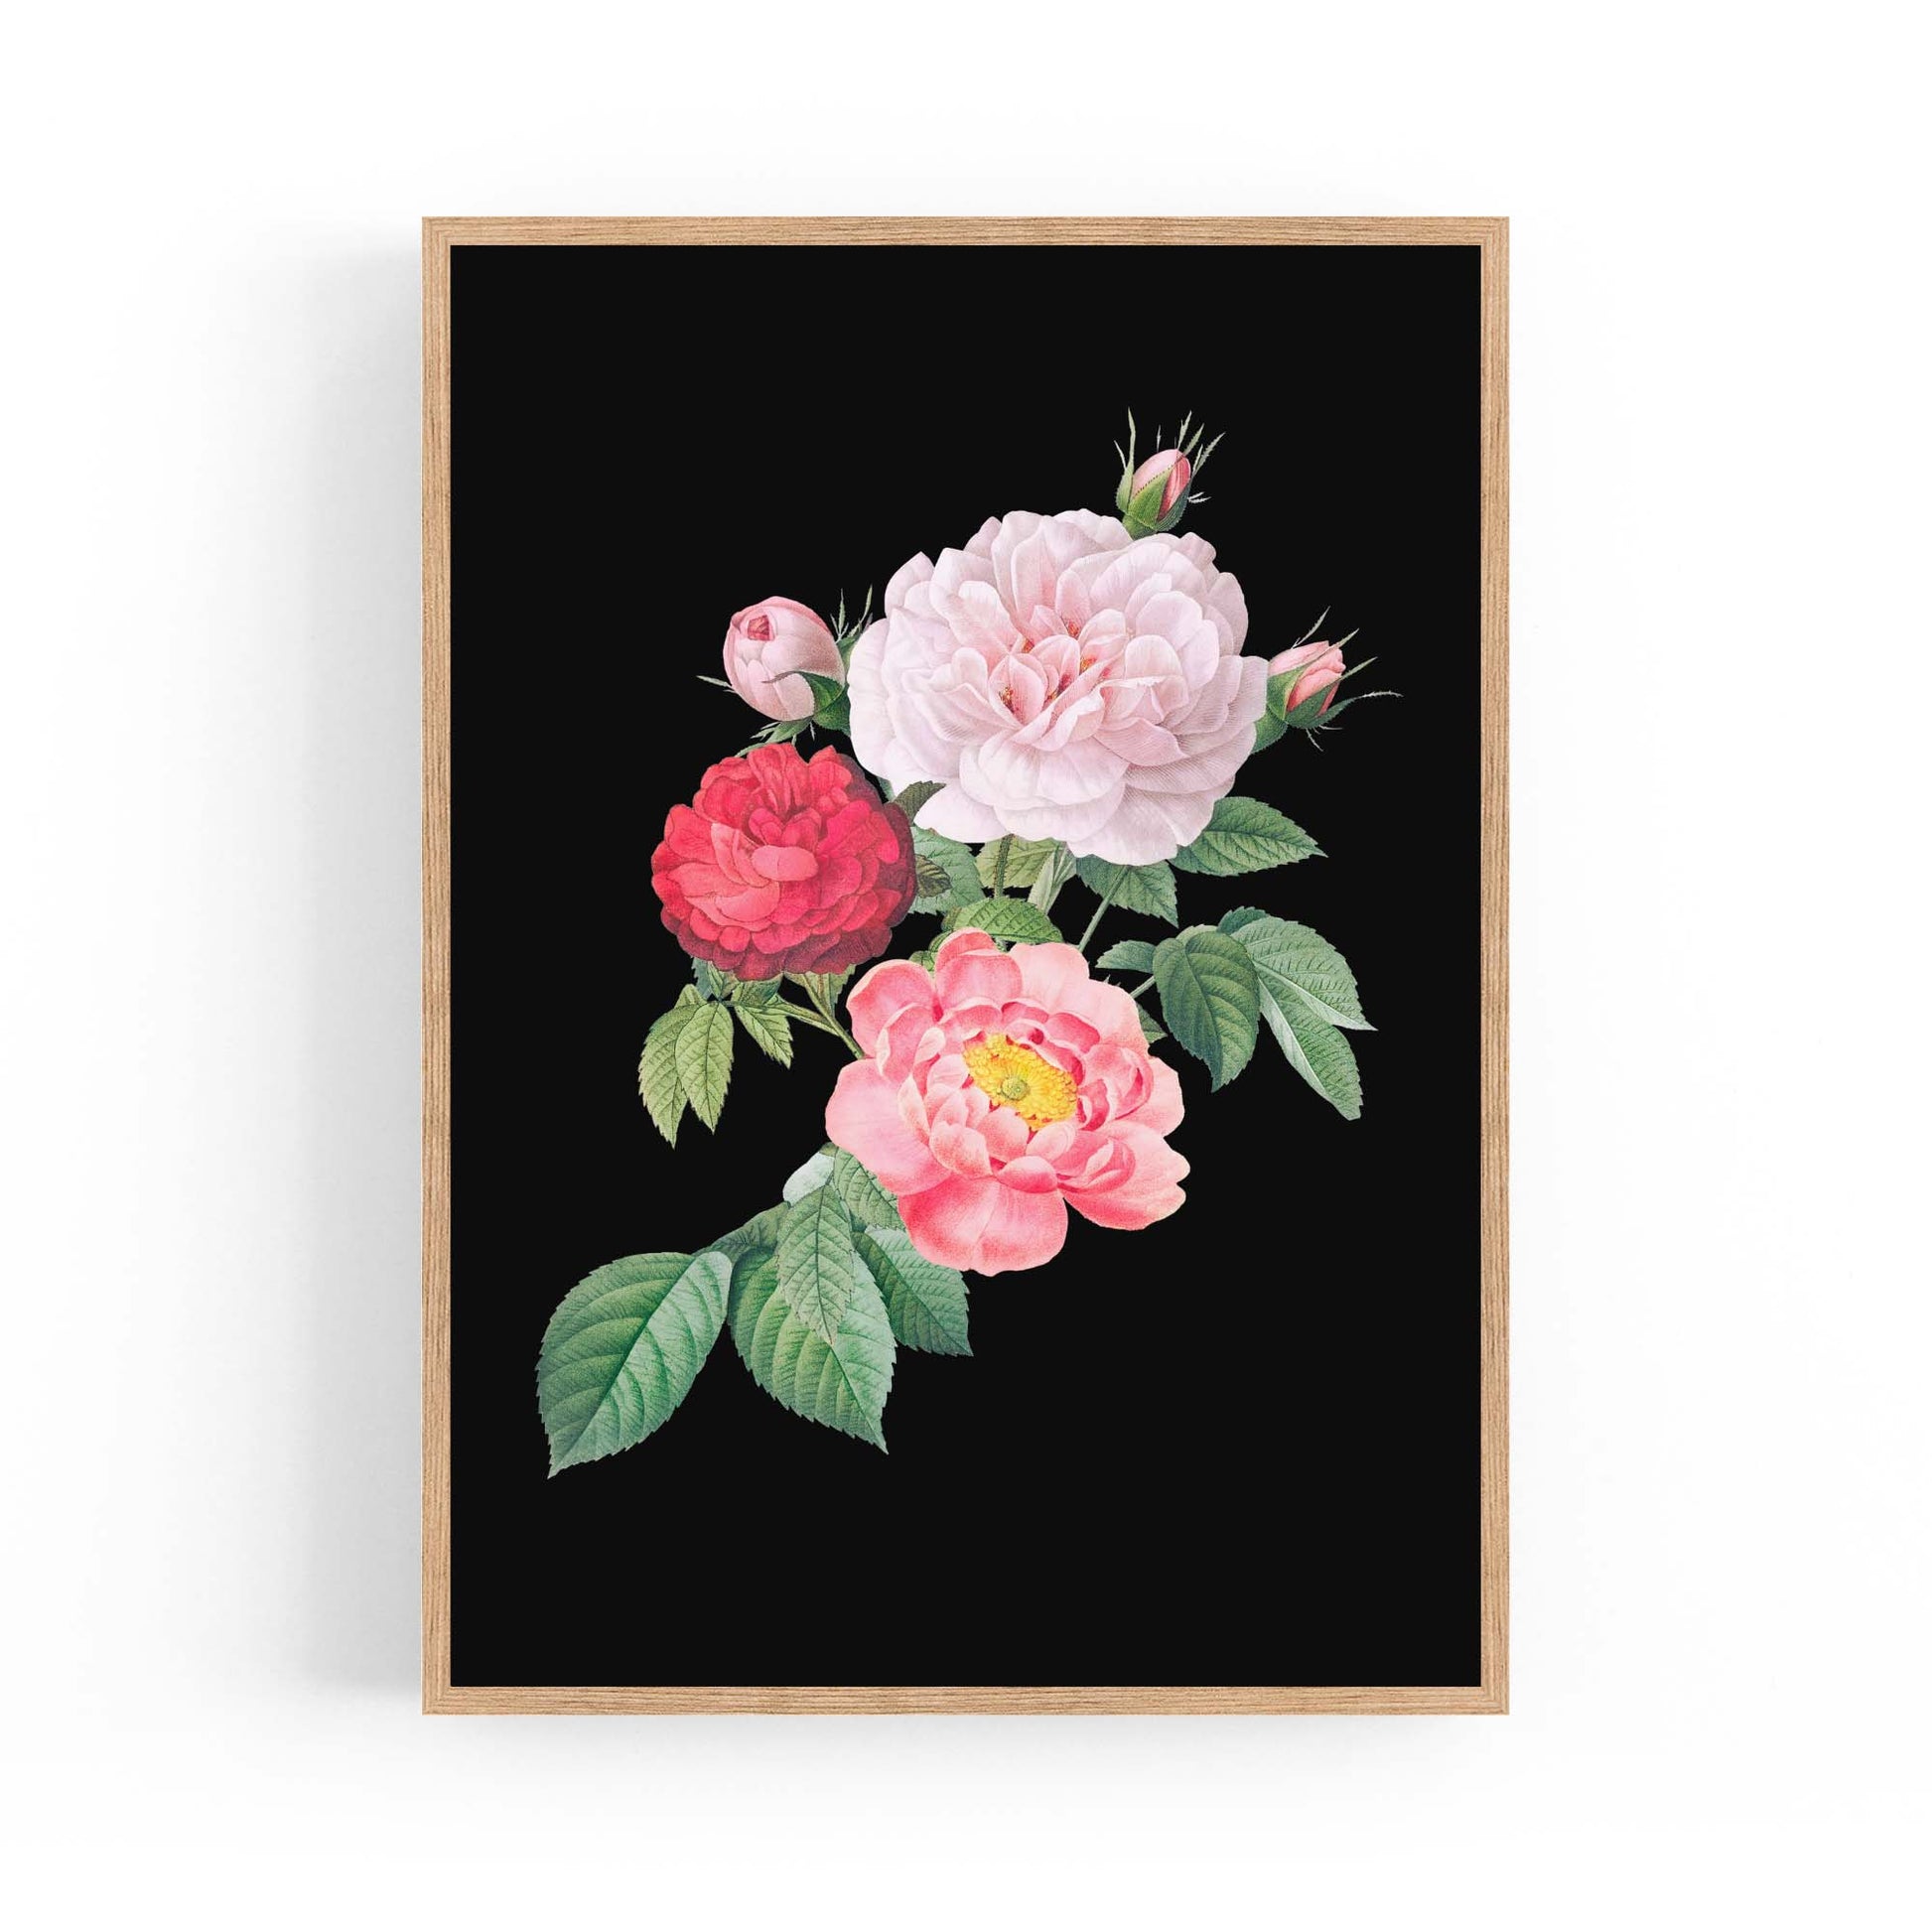 Botanical Flower Painting Floral Kitchen Wall Art #7 - The Affordable Art Company